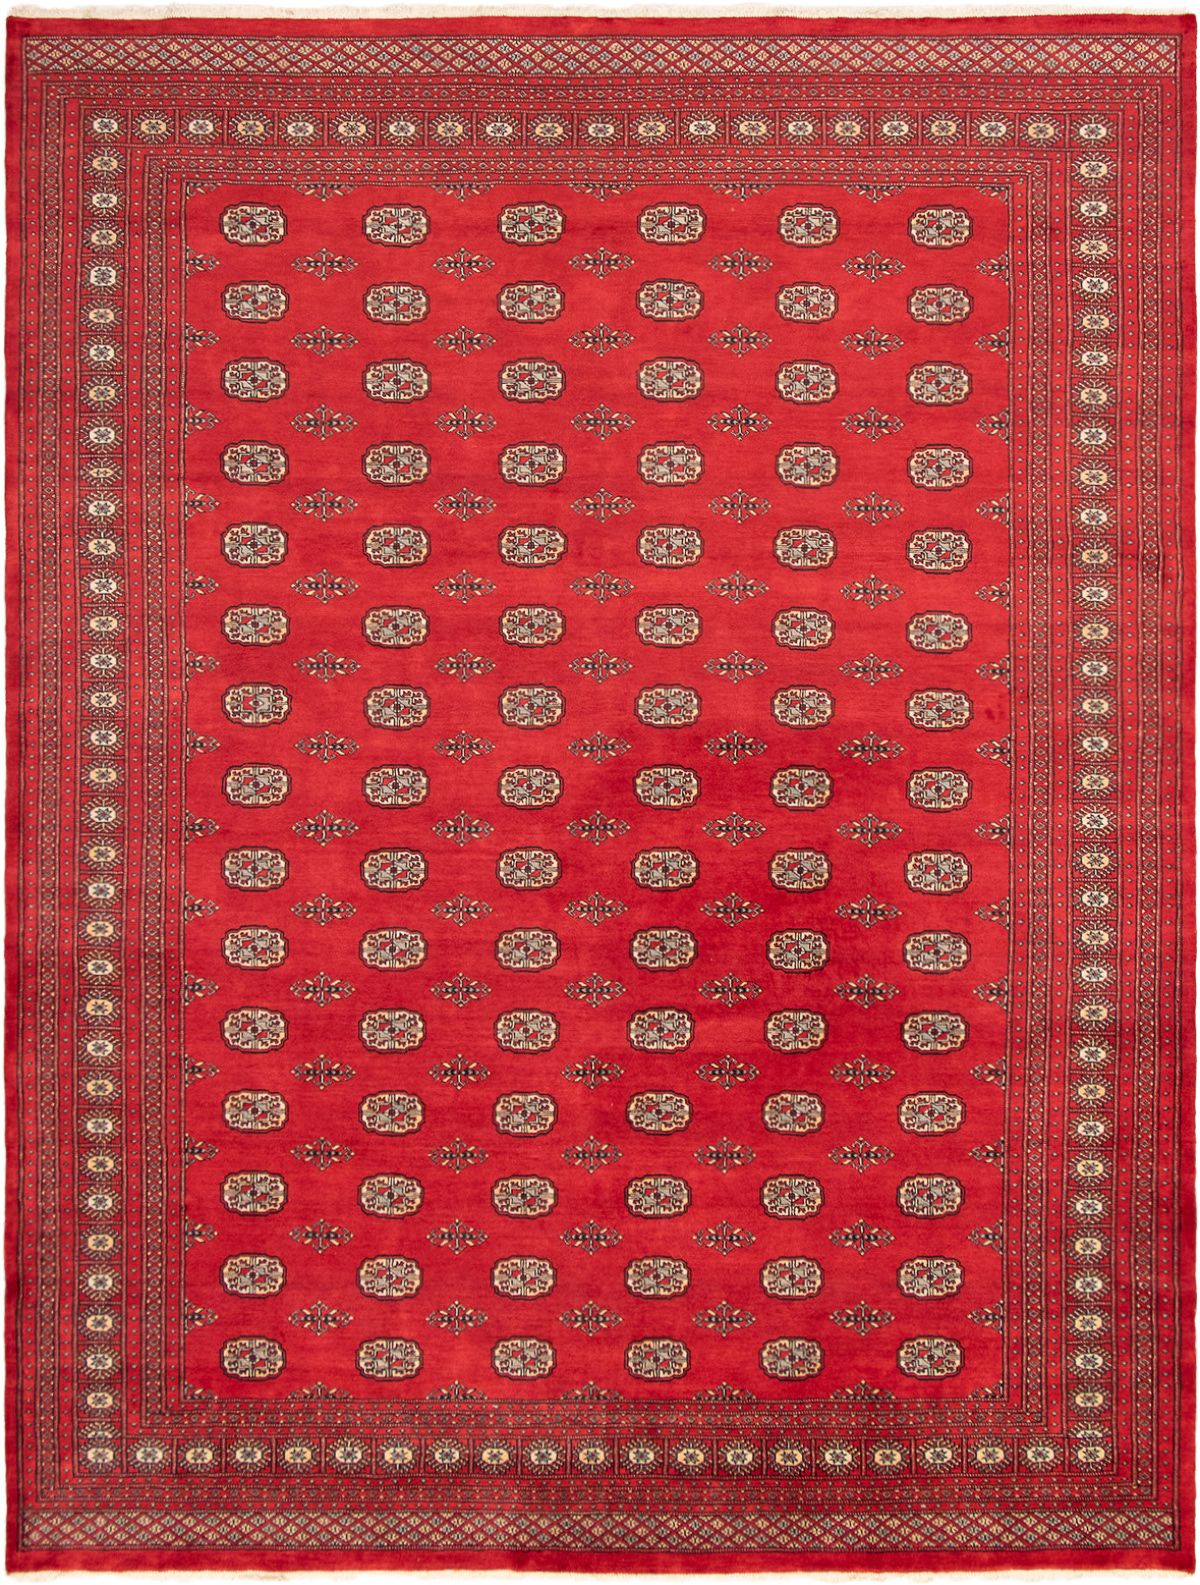 Hand-knotted Finest Peshawar Bokhara Red Wool Rug 9'3" x 12'0"  Size: 9'3" x 12'0"  